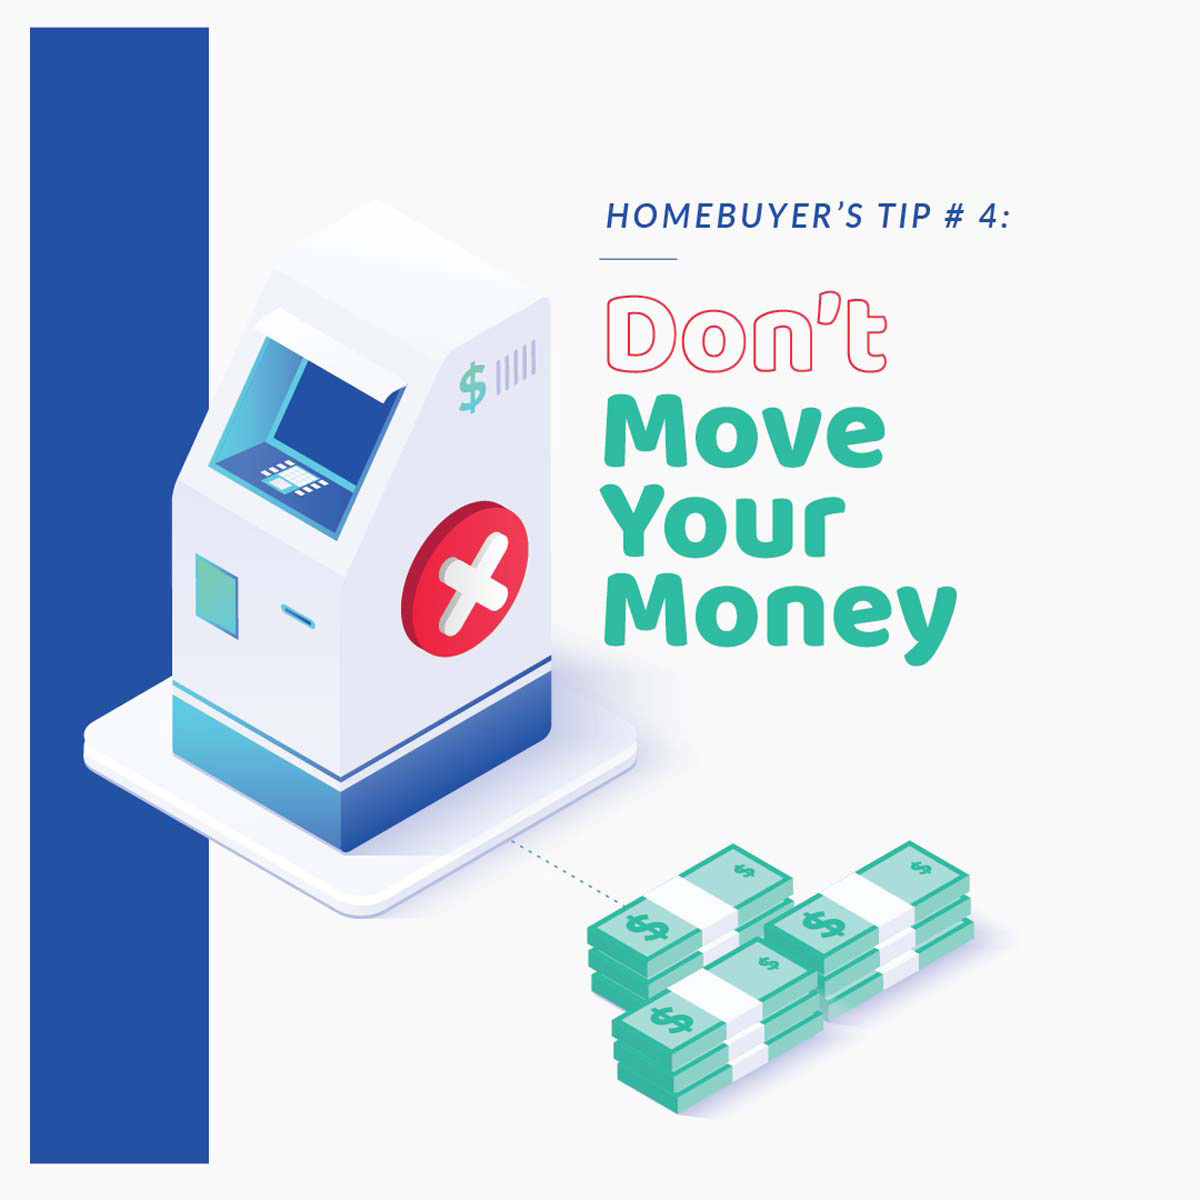 If you're planning to buy a home soon, it's better to keep your finances as consistent as possible. Postponing major money moves until after you've purchased you home can lead to a smoother application process. #mortgageloan #mortgageadvice #homeloan #firsttimehomebuyer